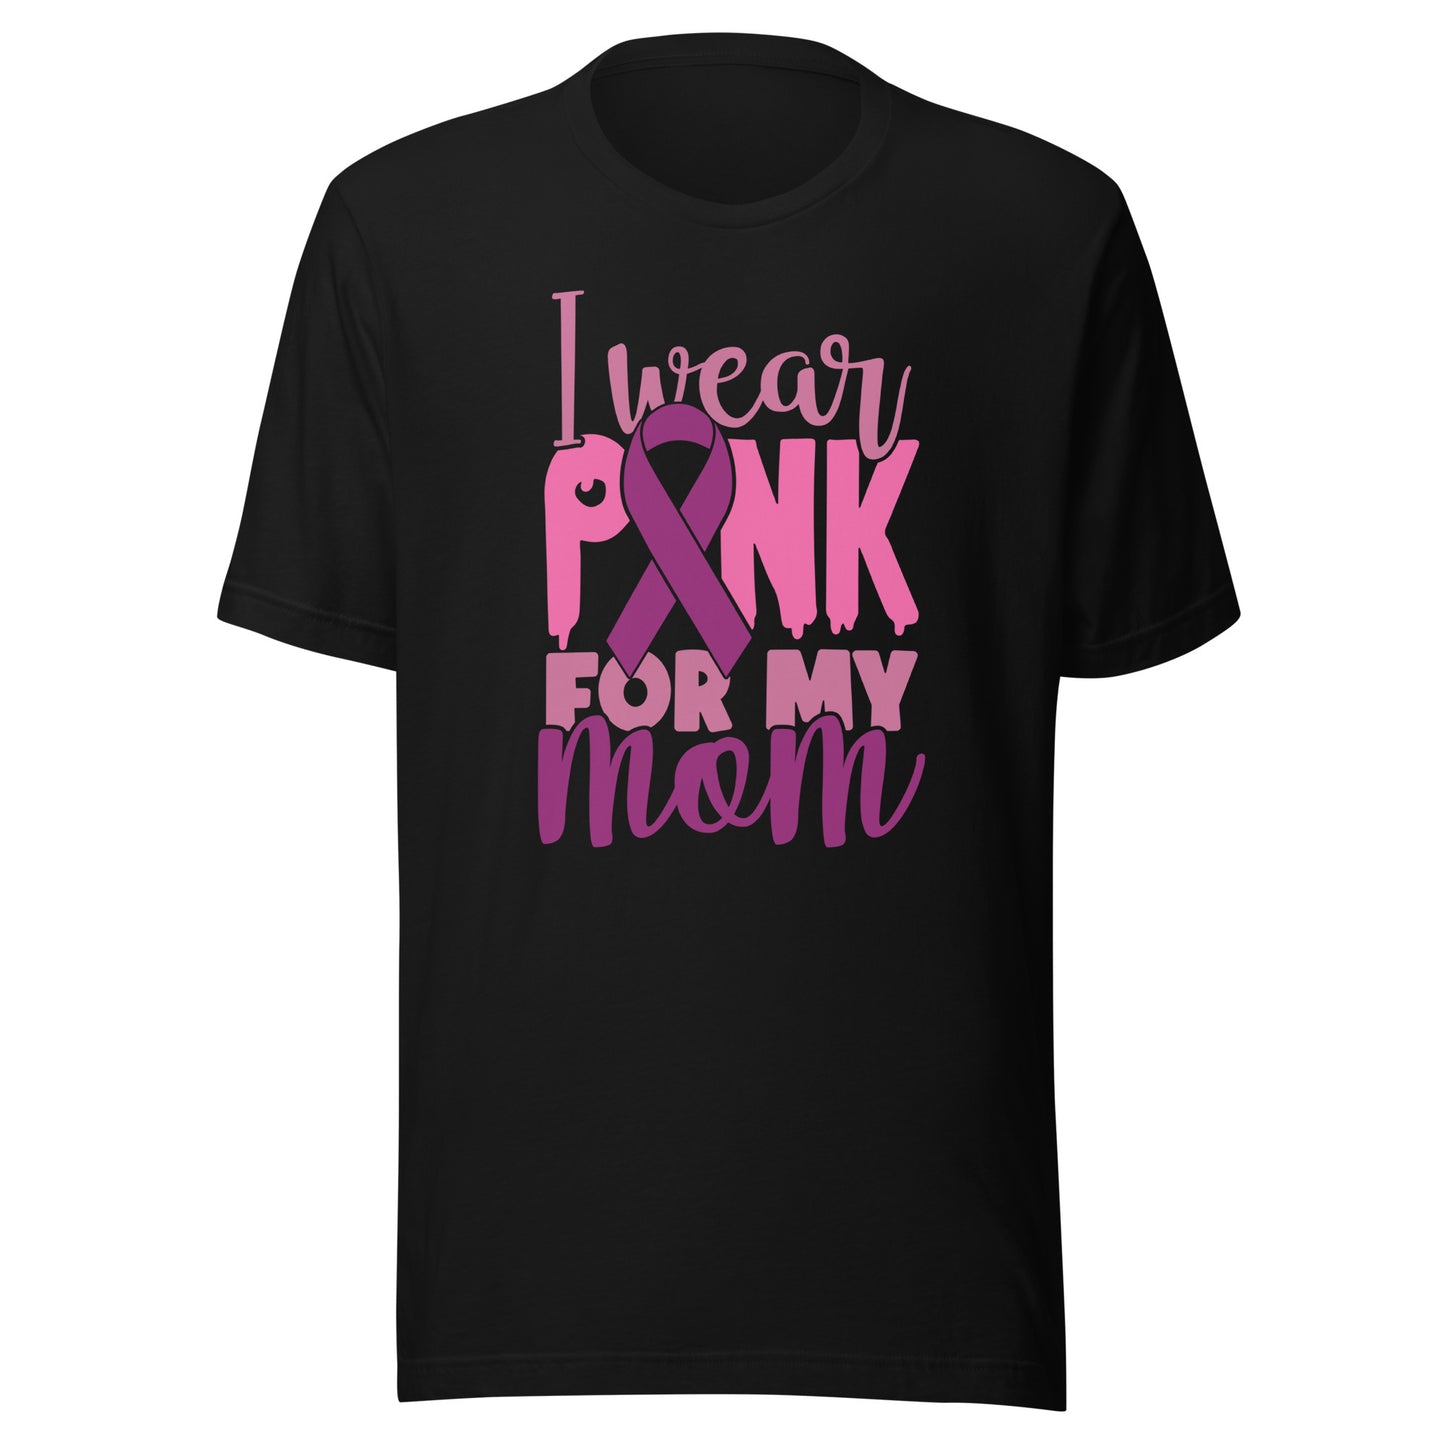 I Wear Pink For My Mom - Breast Cancer Awareness Pink Cancer Ribbon Support Unisex T-shirt